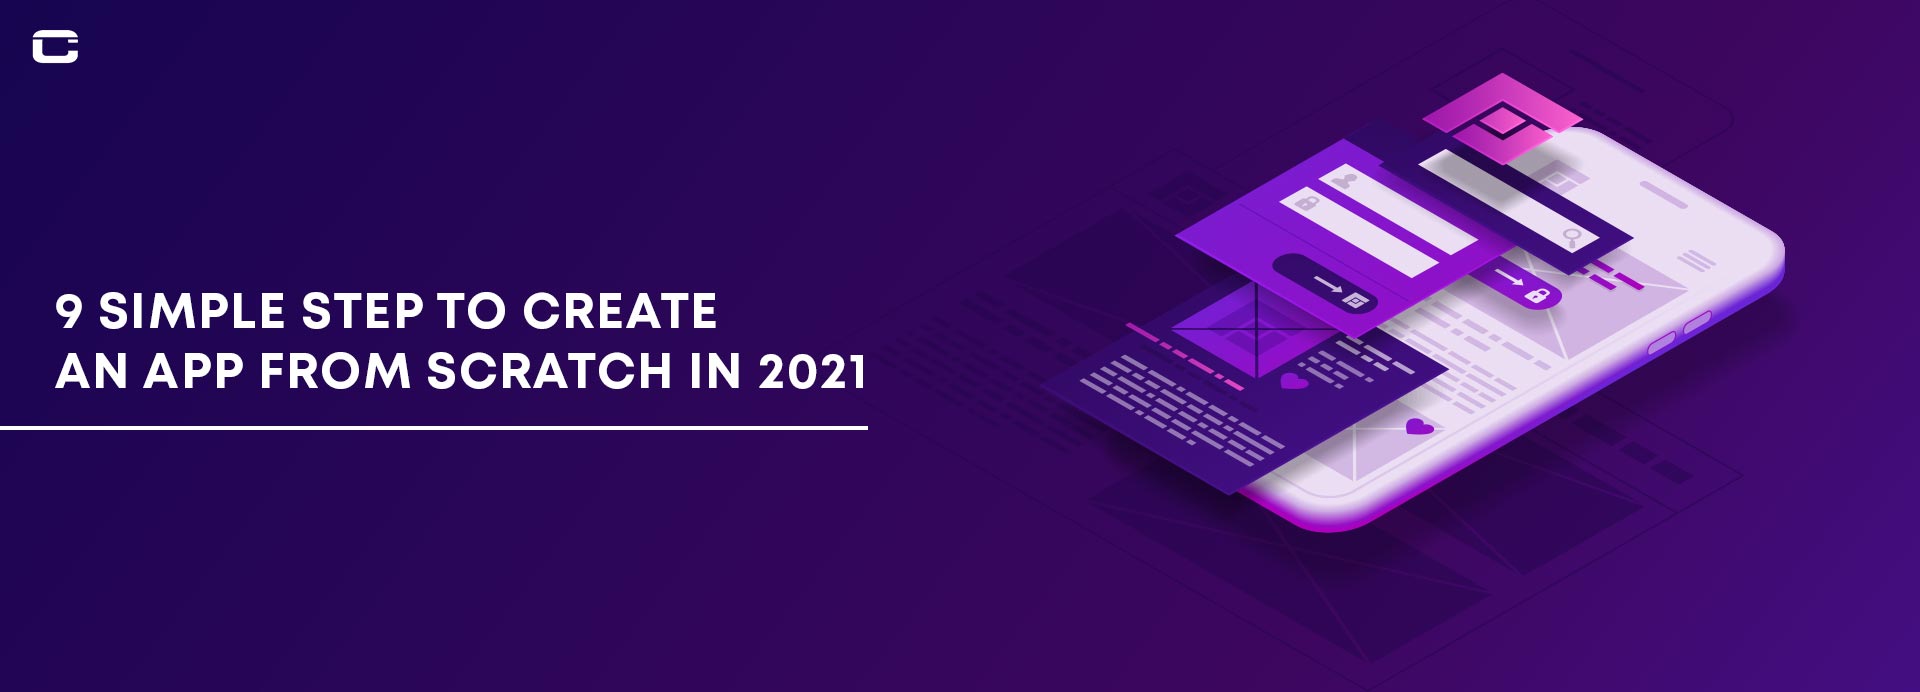 Simple Way to Create an App From Scratch in 2021